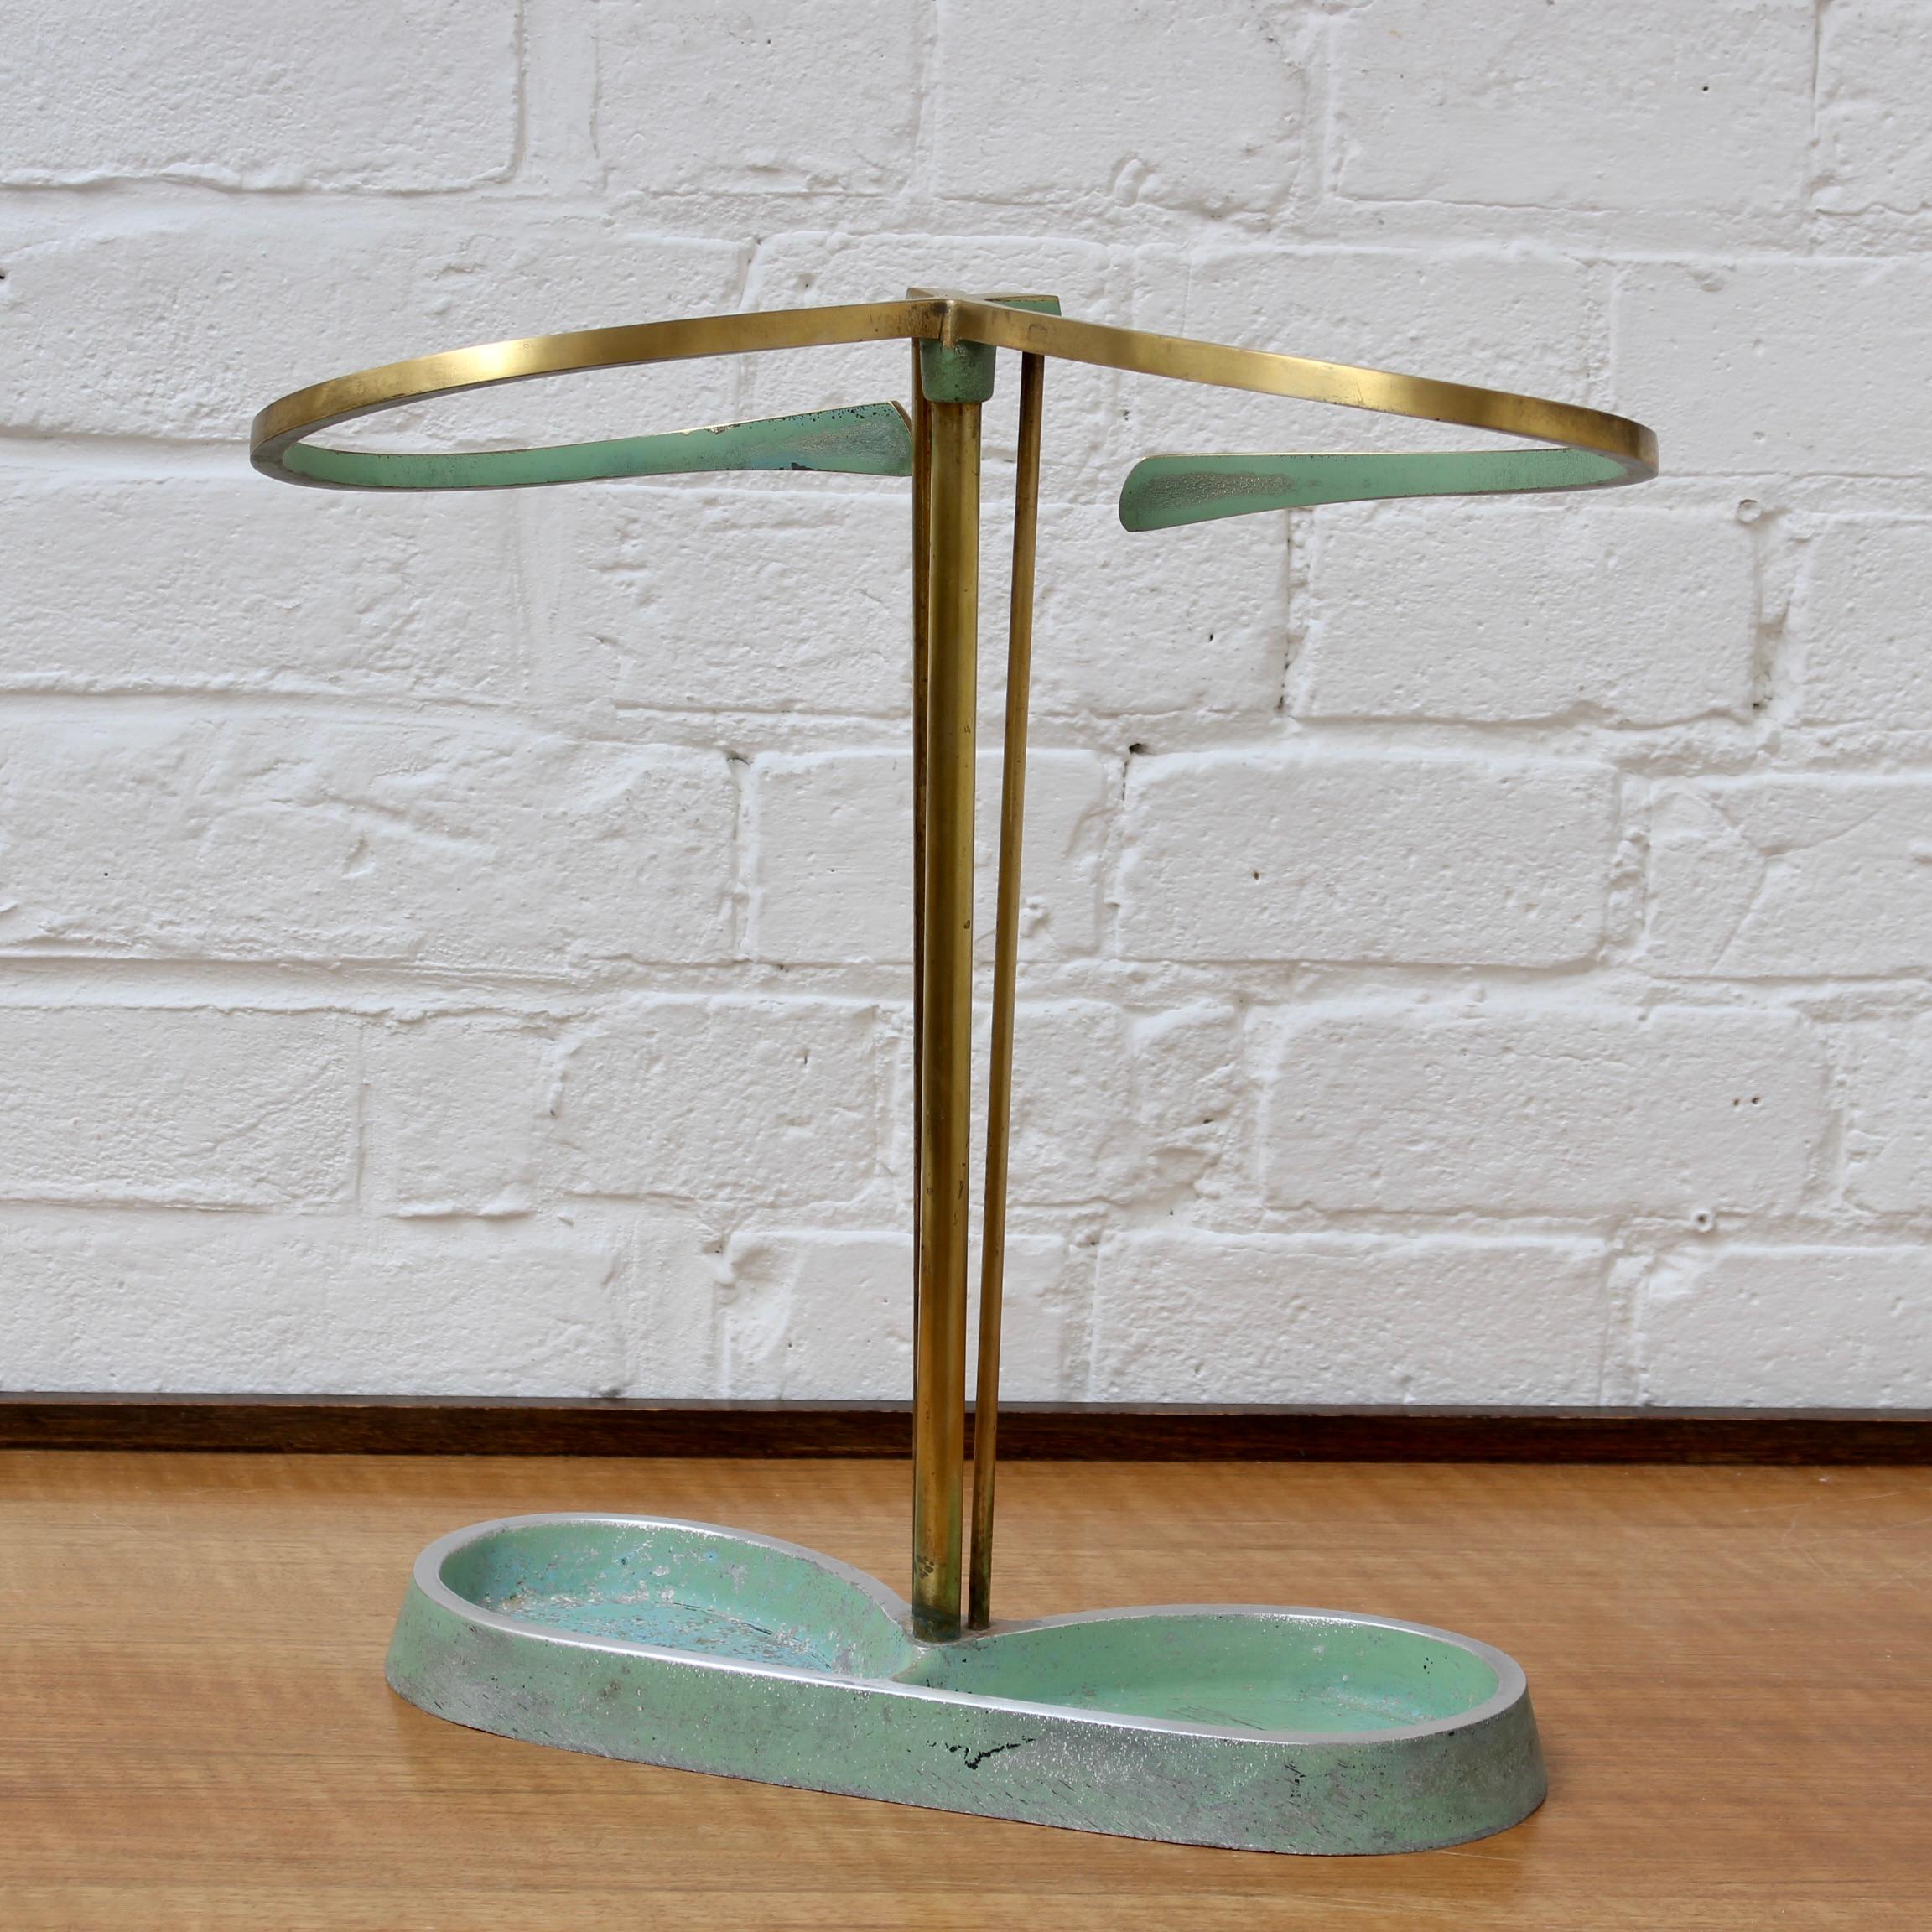 Mid-20th Century Midcentury Modern Brass Umbrella Stand Attributed to Artes H&H Seefried Steppach For Sale